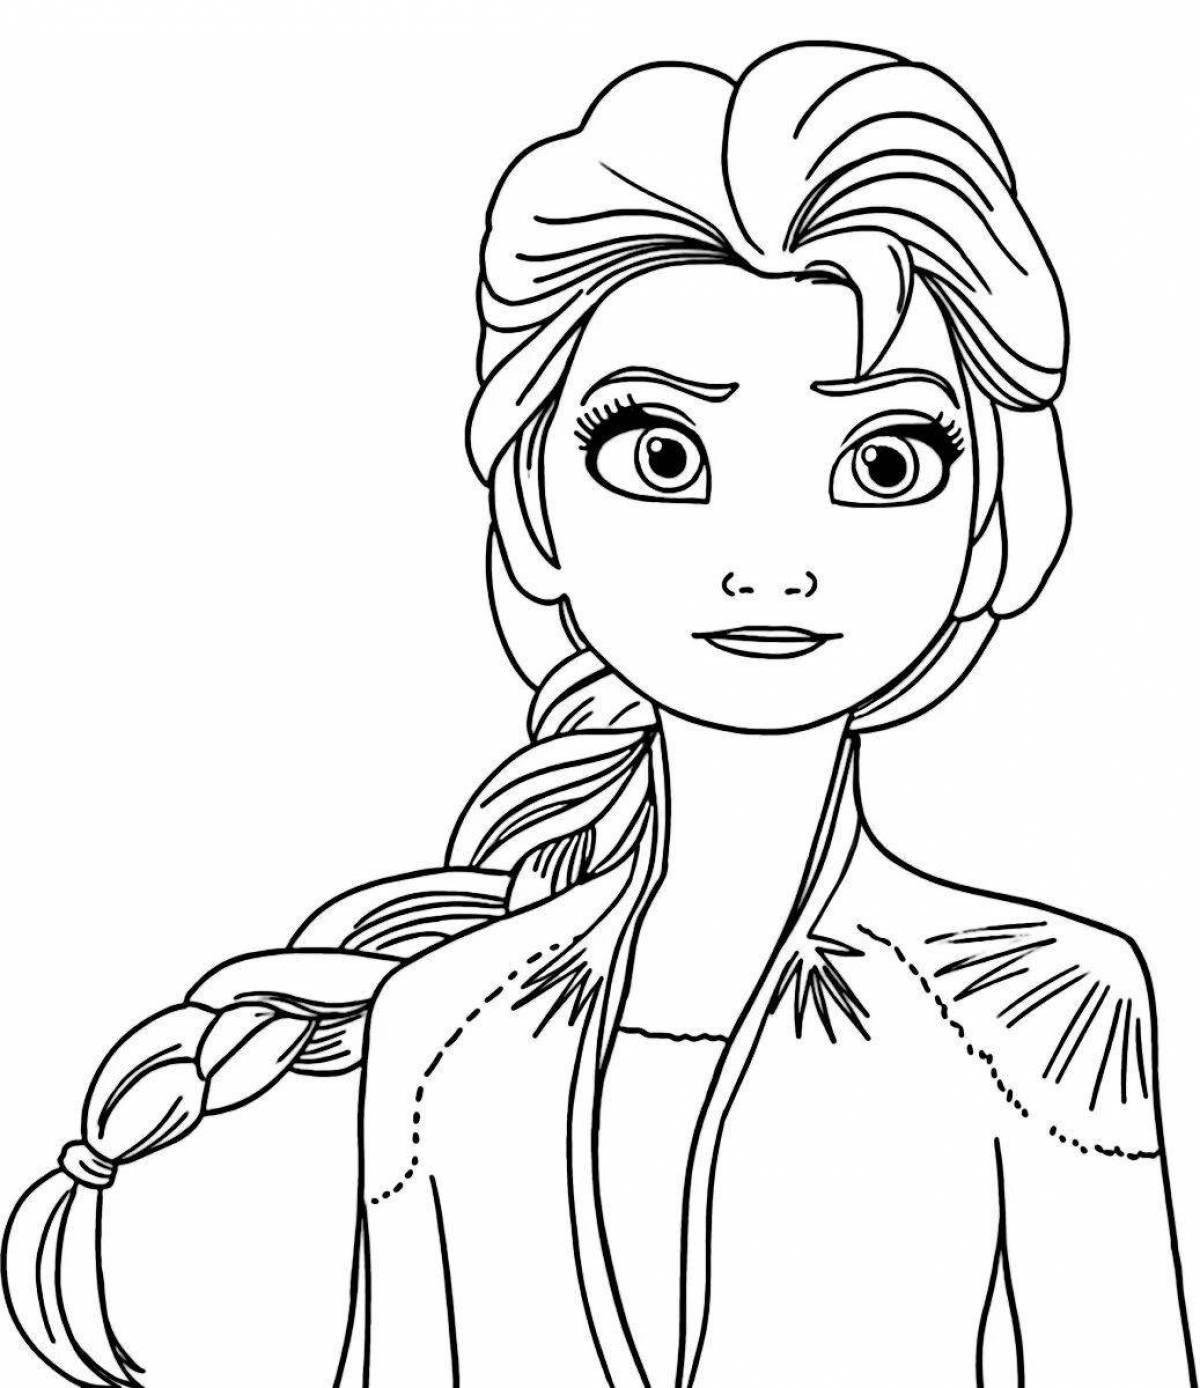 Fairytale coloring elsa and anna color